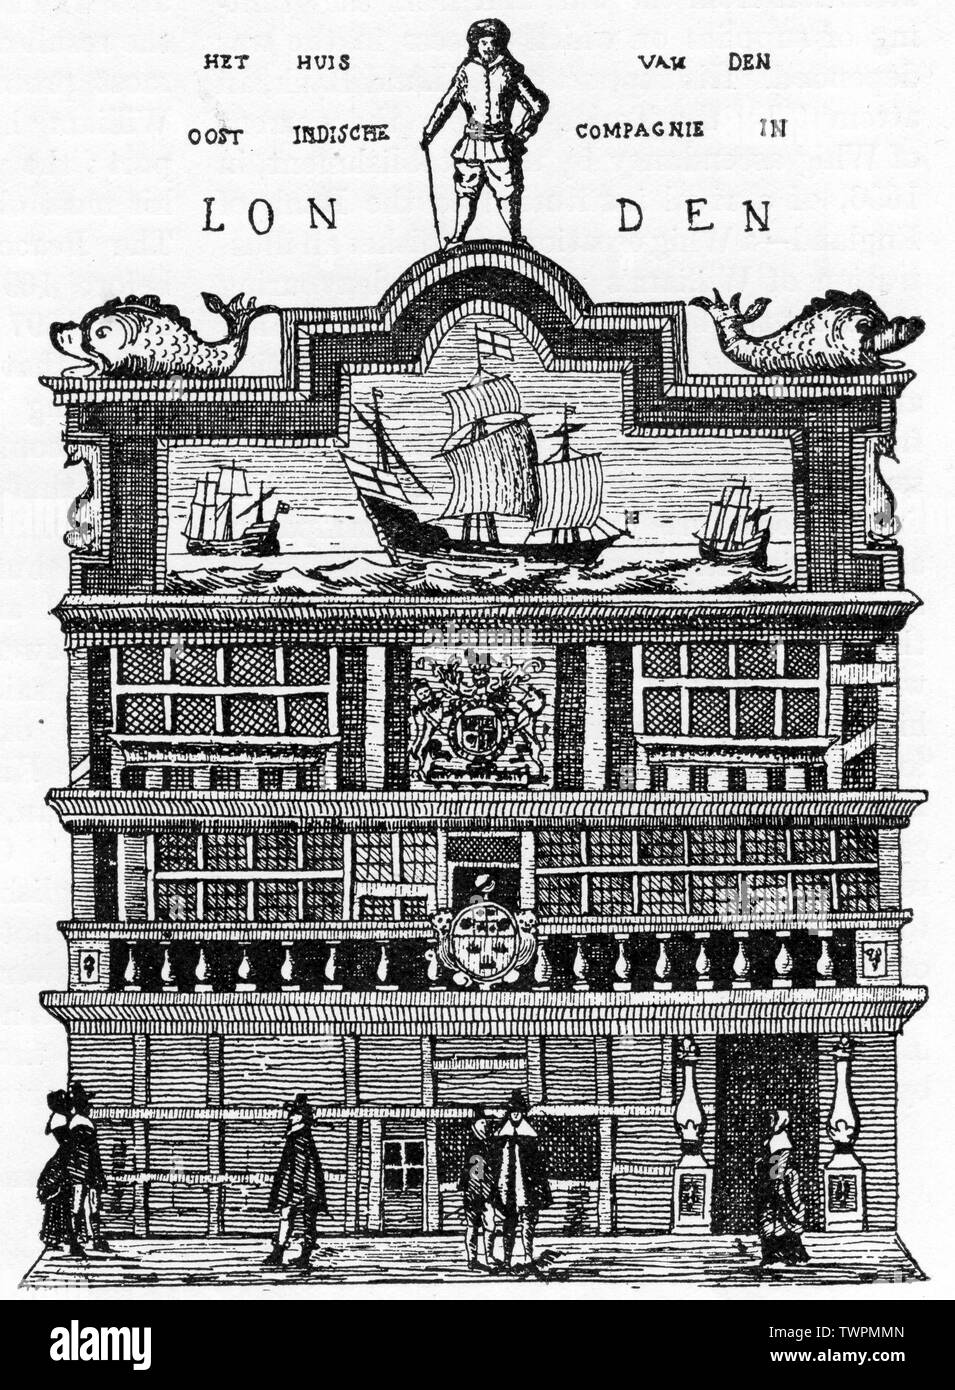 'The Old East India House, Leadenhall Street, 1648-1726'. From Frederick Craces' 'Portfolio of London Views'. View of East India House before it was rebuilt in 1726. Stock Photo